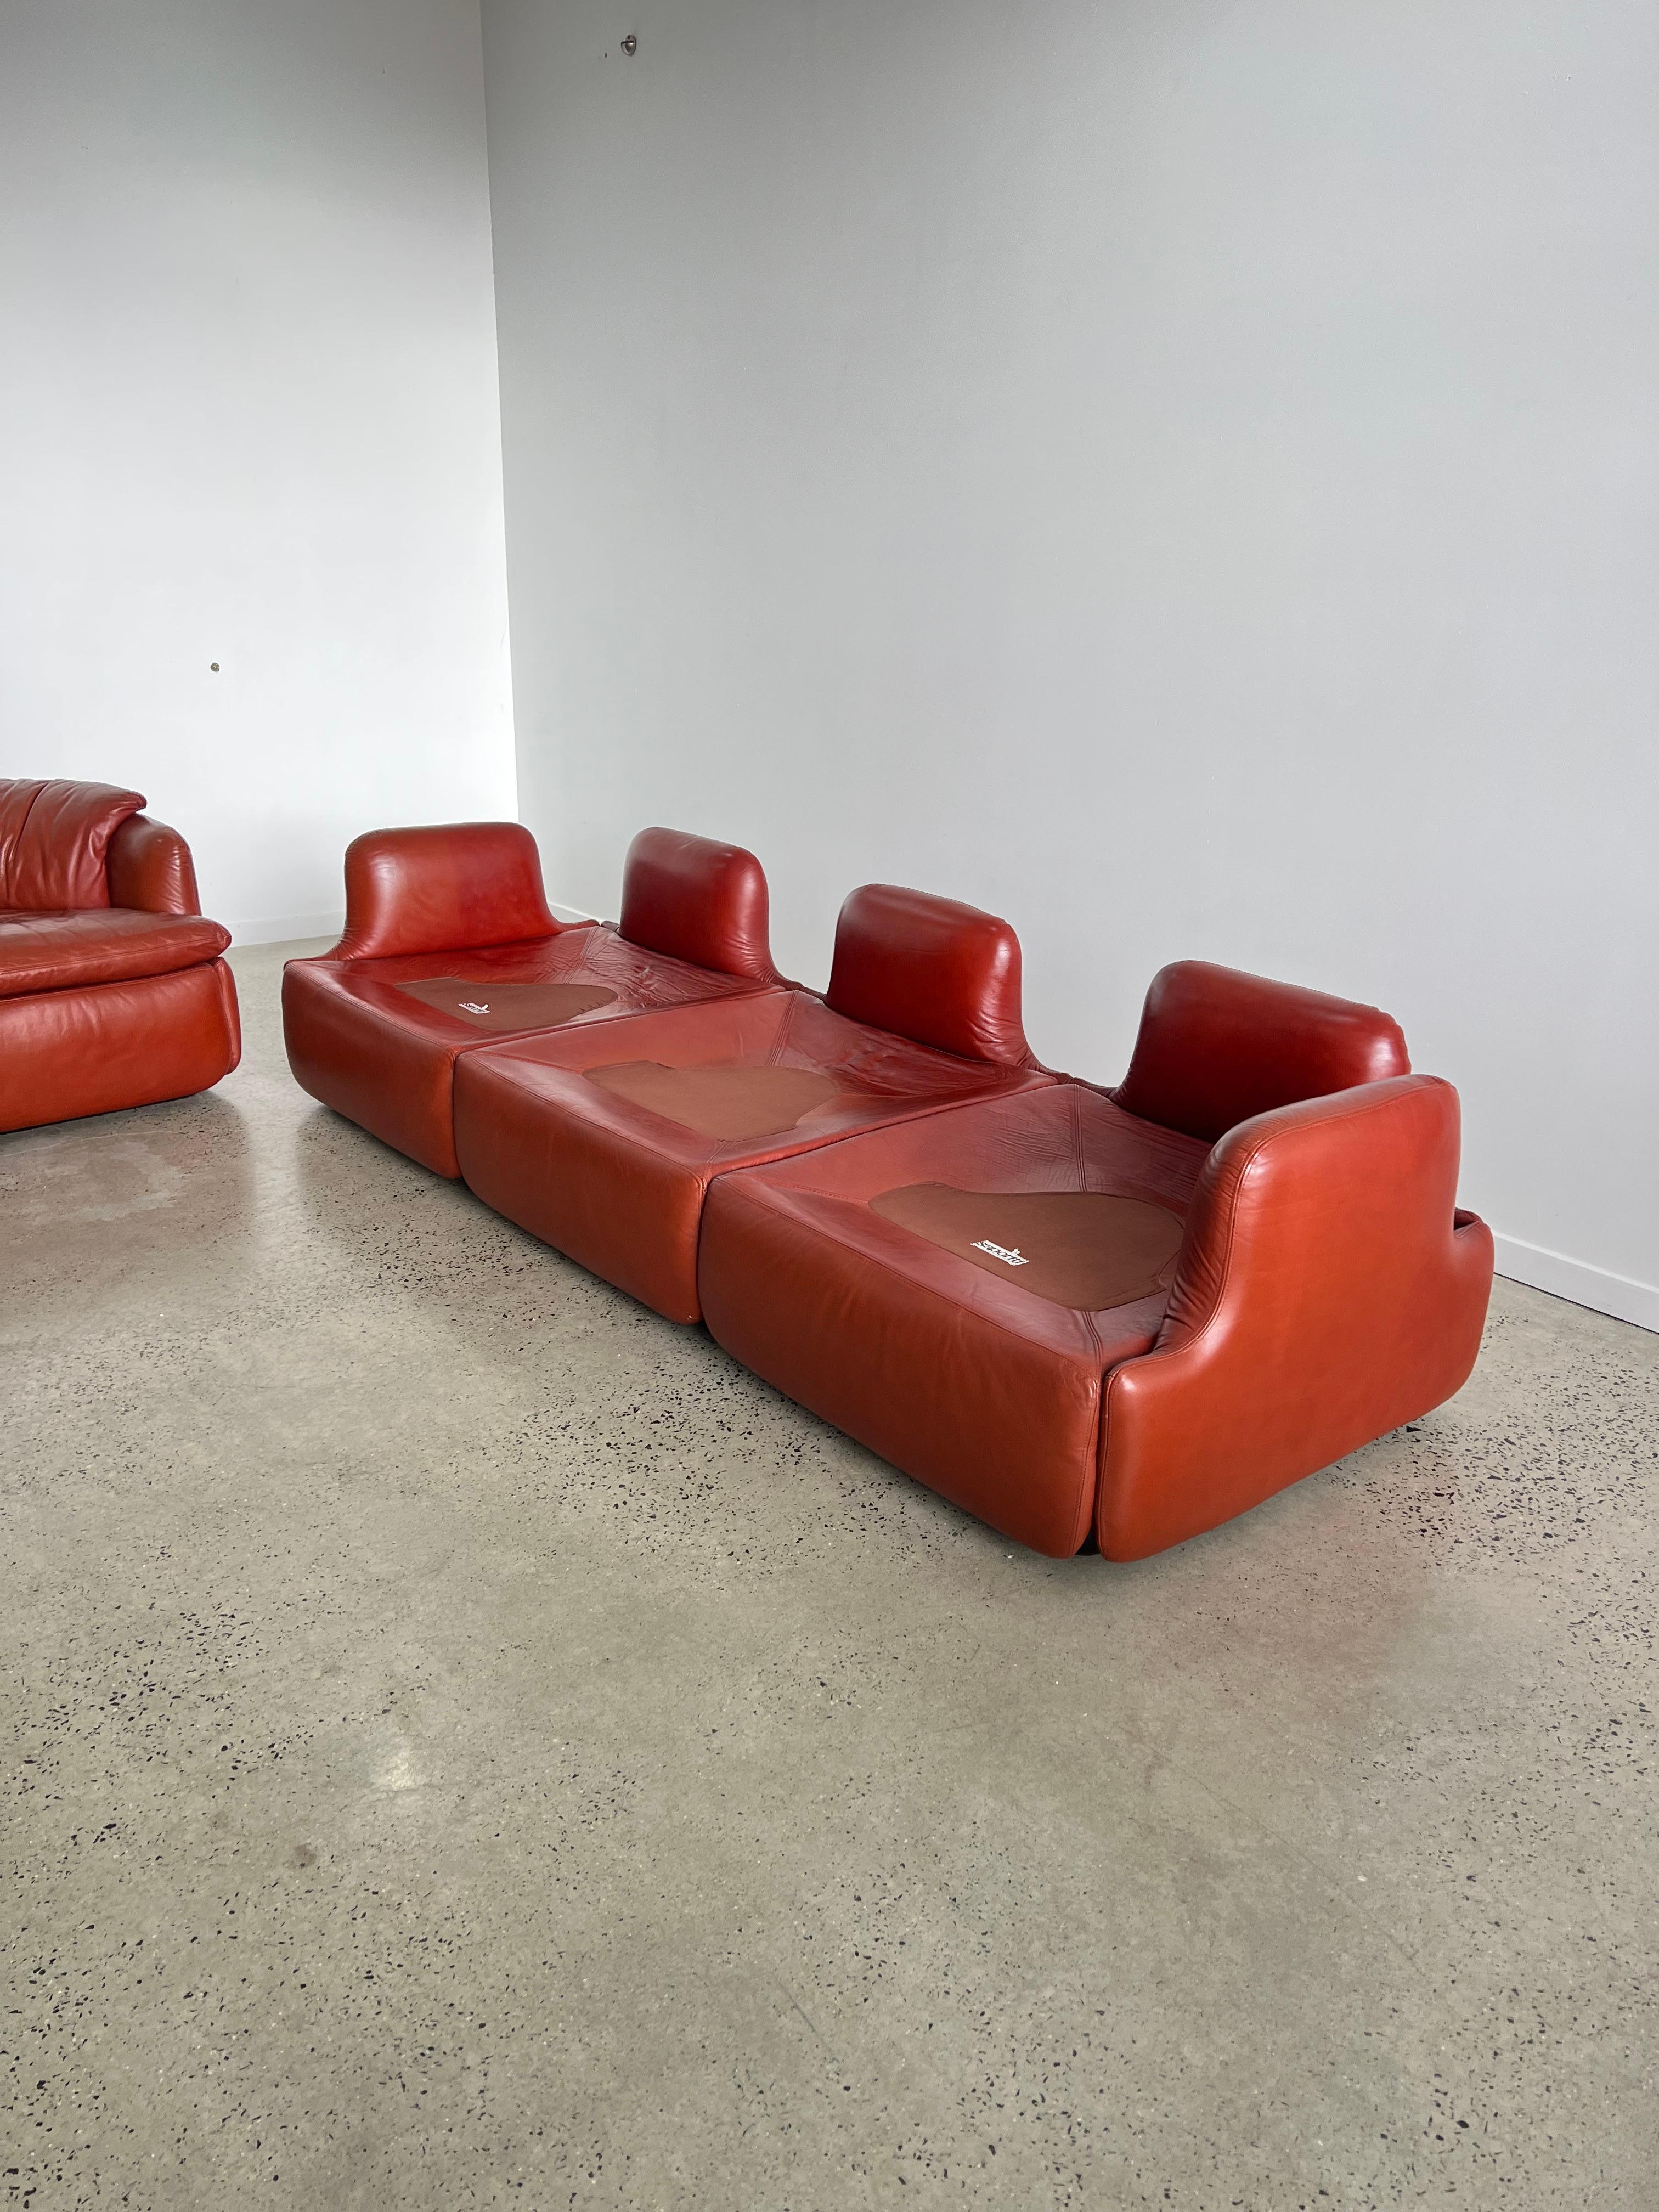 Rare full set of two armchairs and a three seater sofa by Alberto Rosselli for Saporiti.
The 